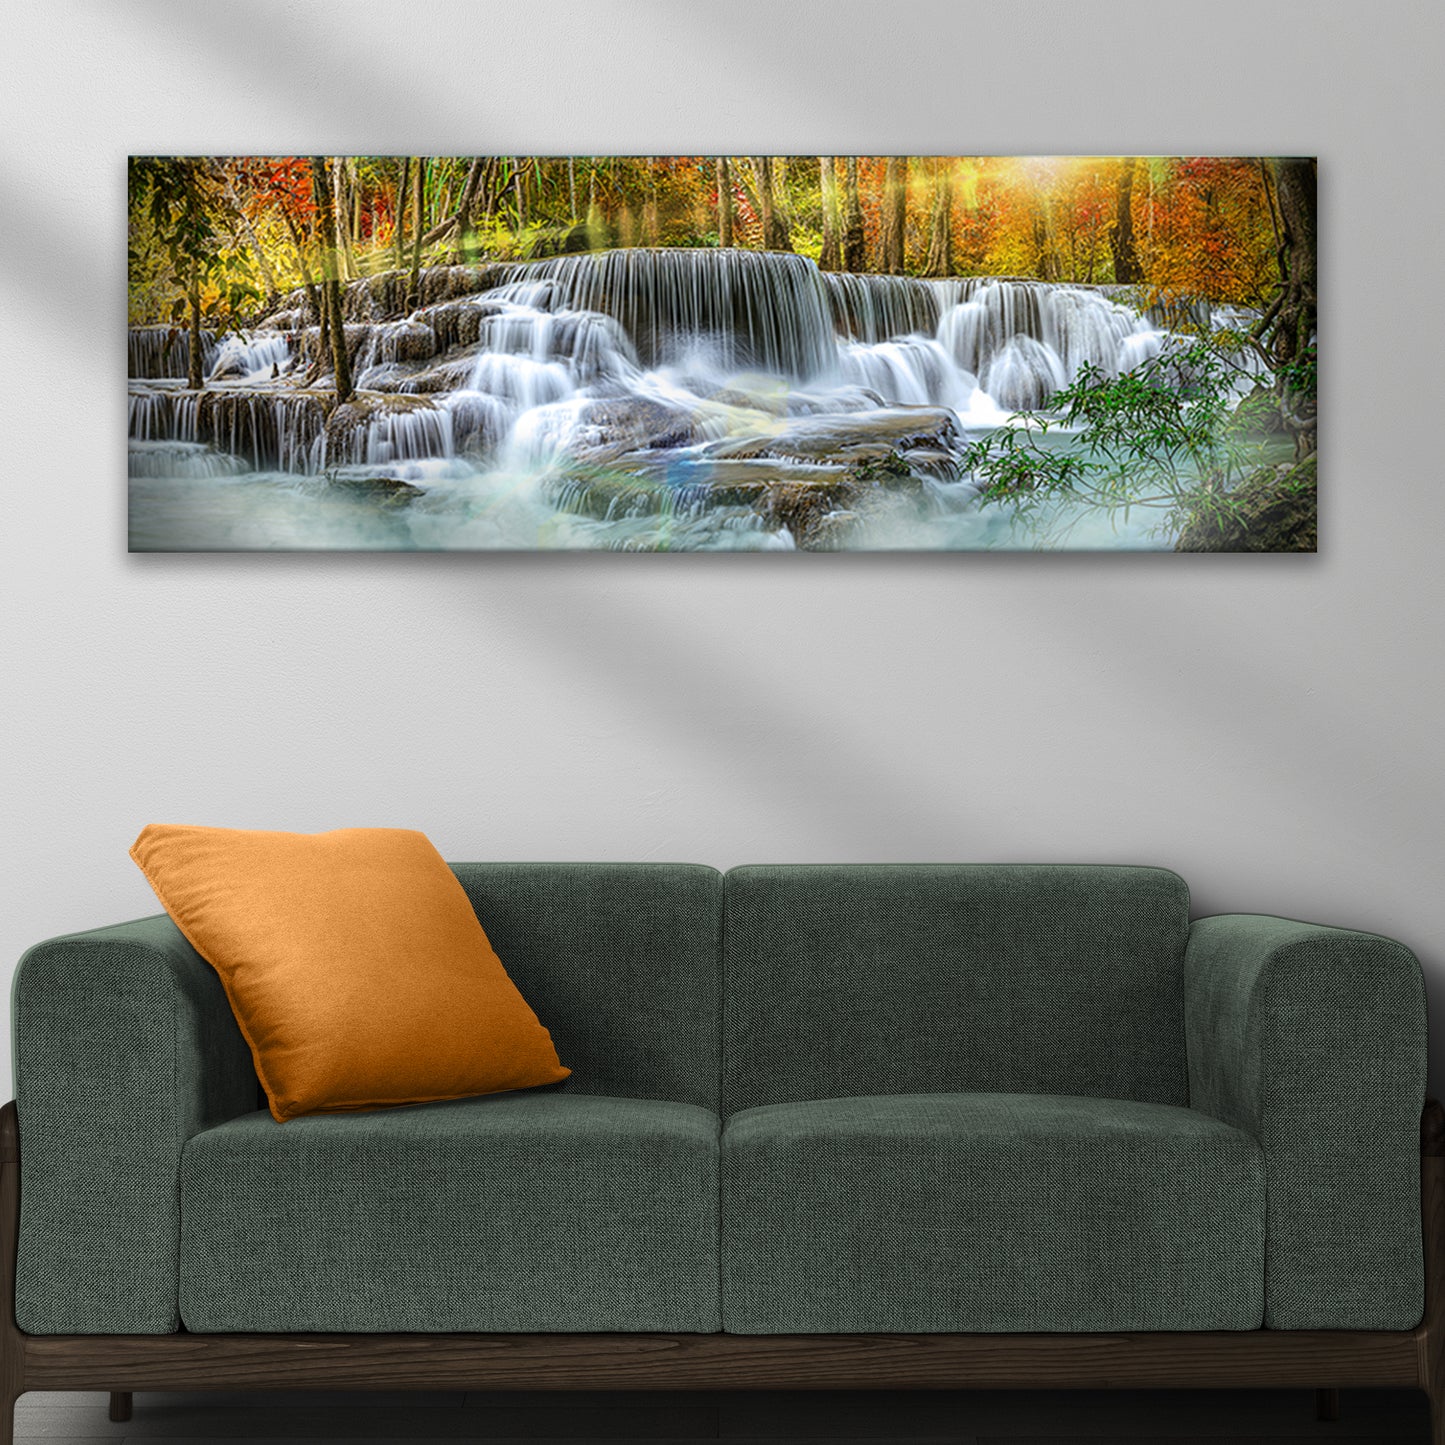 Waterfall In Forest River Canvas Wall Art Style 1 - Image by Tailored Canvases